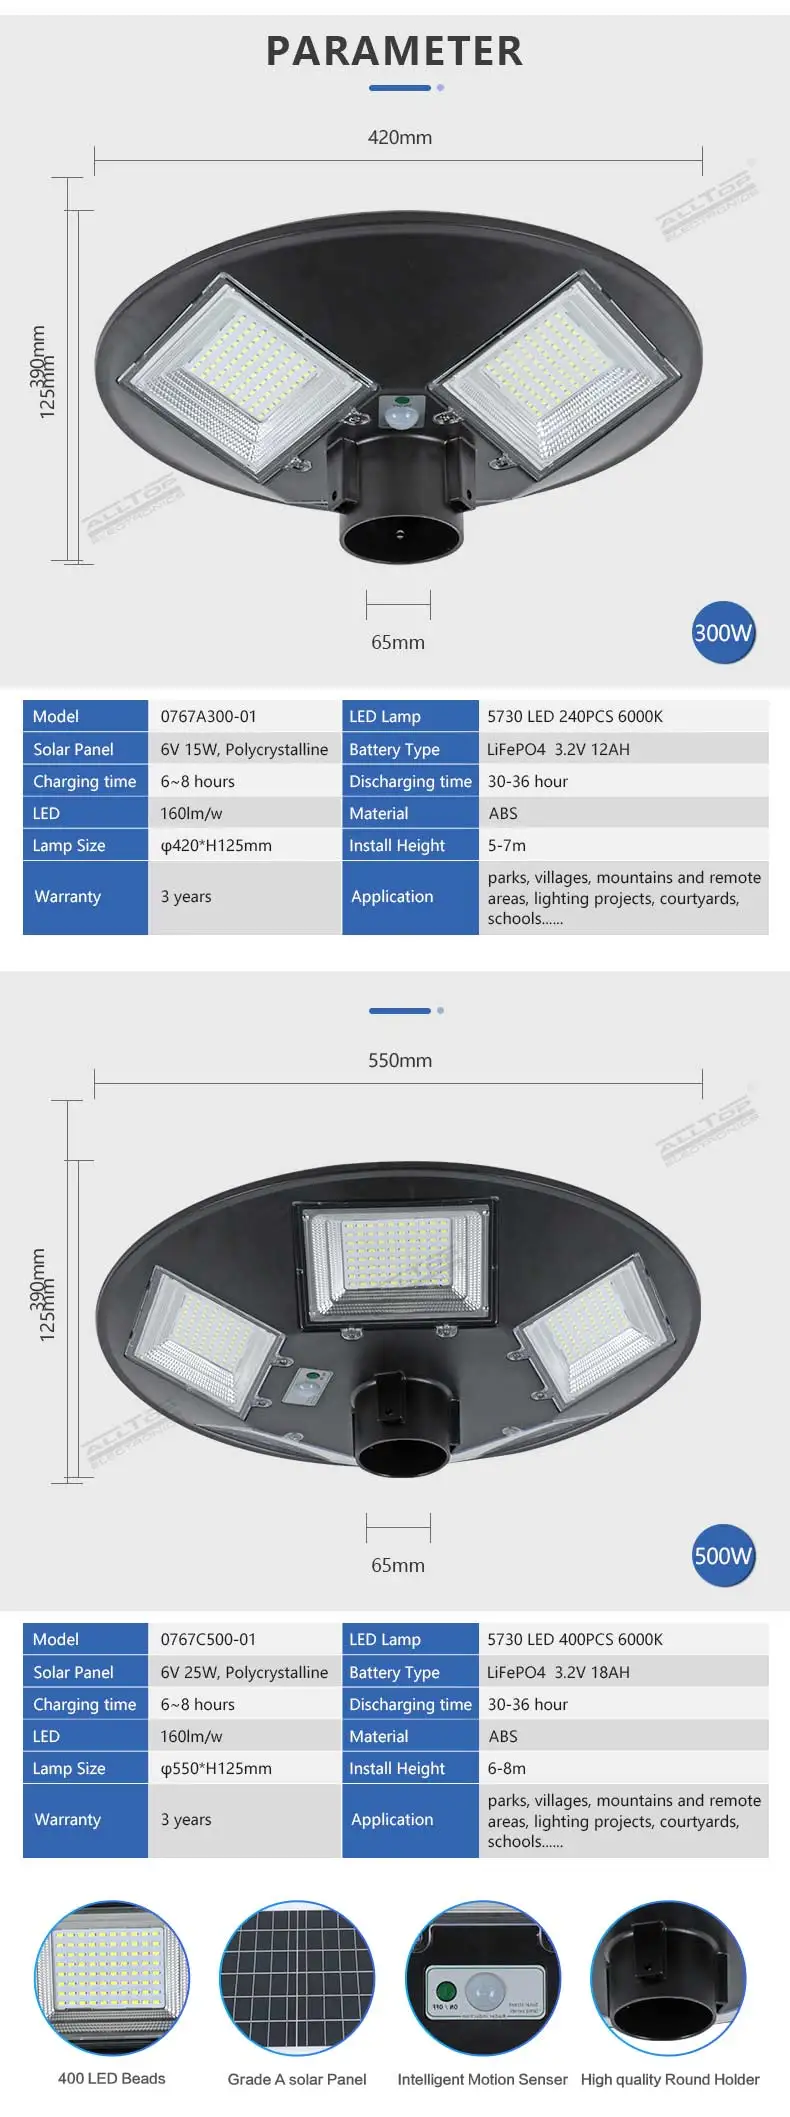 ALLTOP led light manufacturing company-7